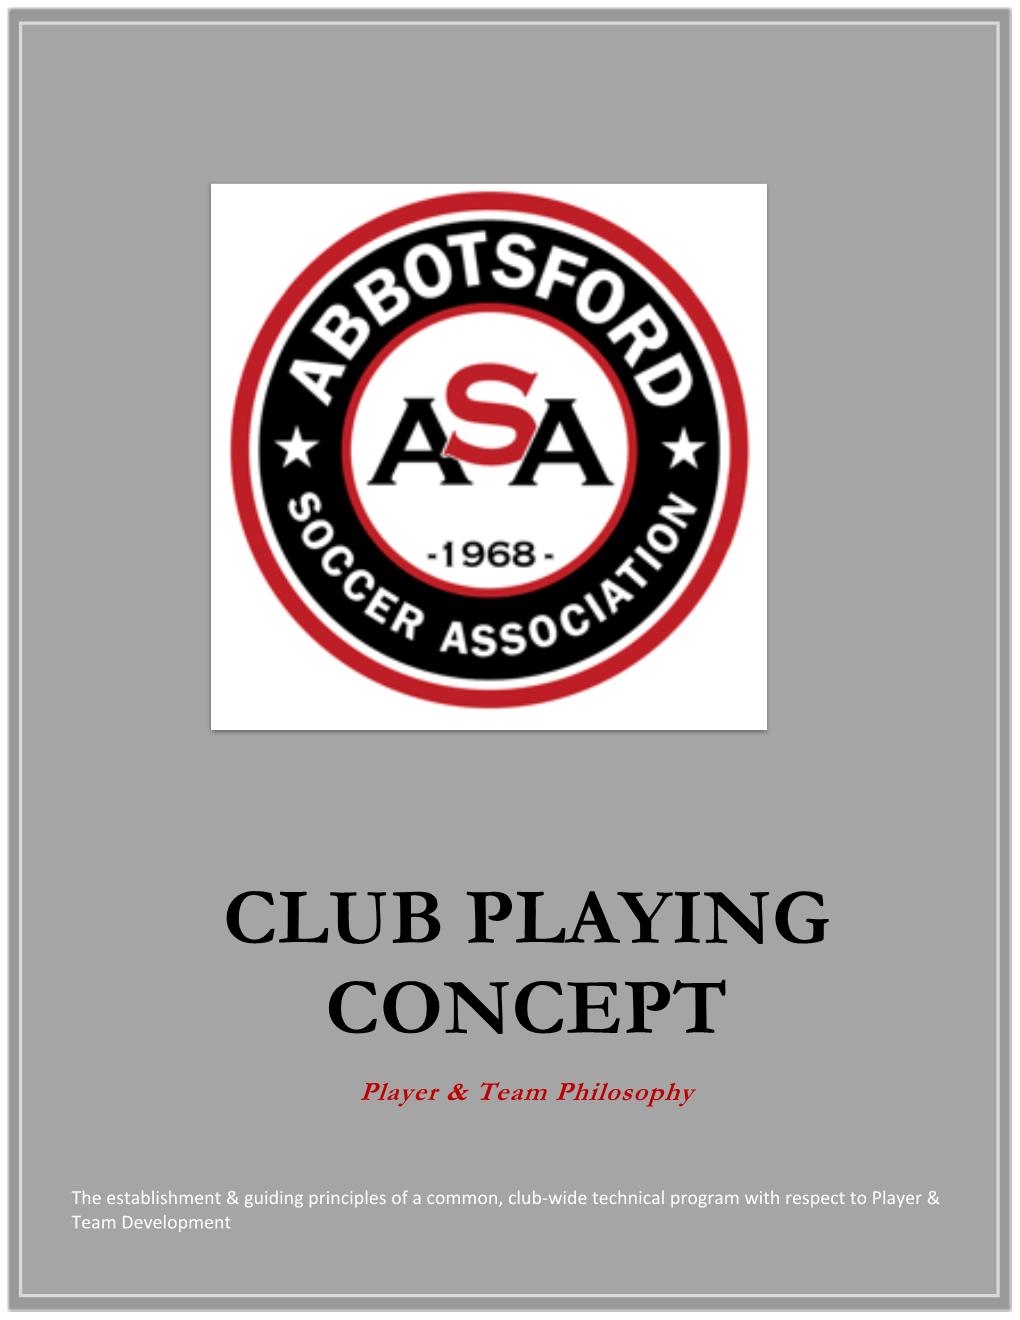 ASA - Club Playing Concept – 2016/17 INTRODUCTION